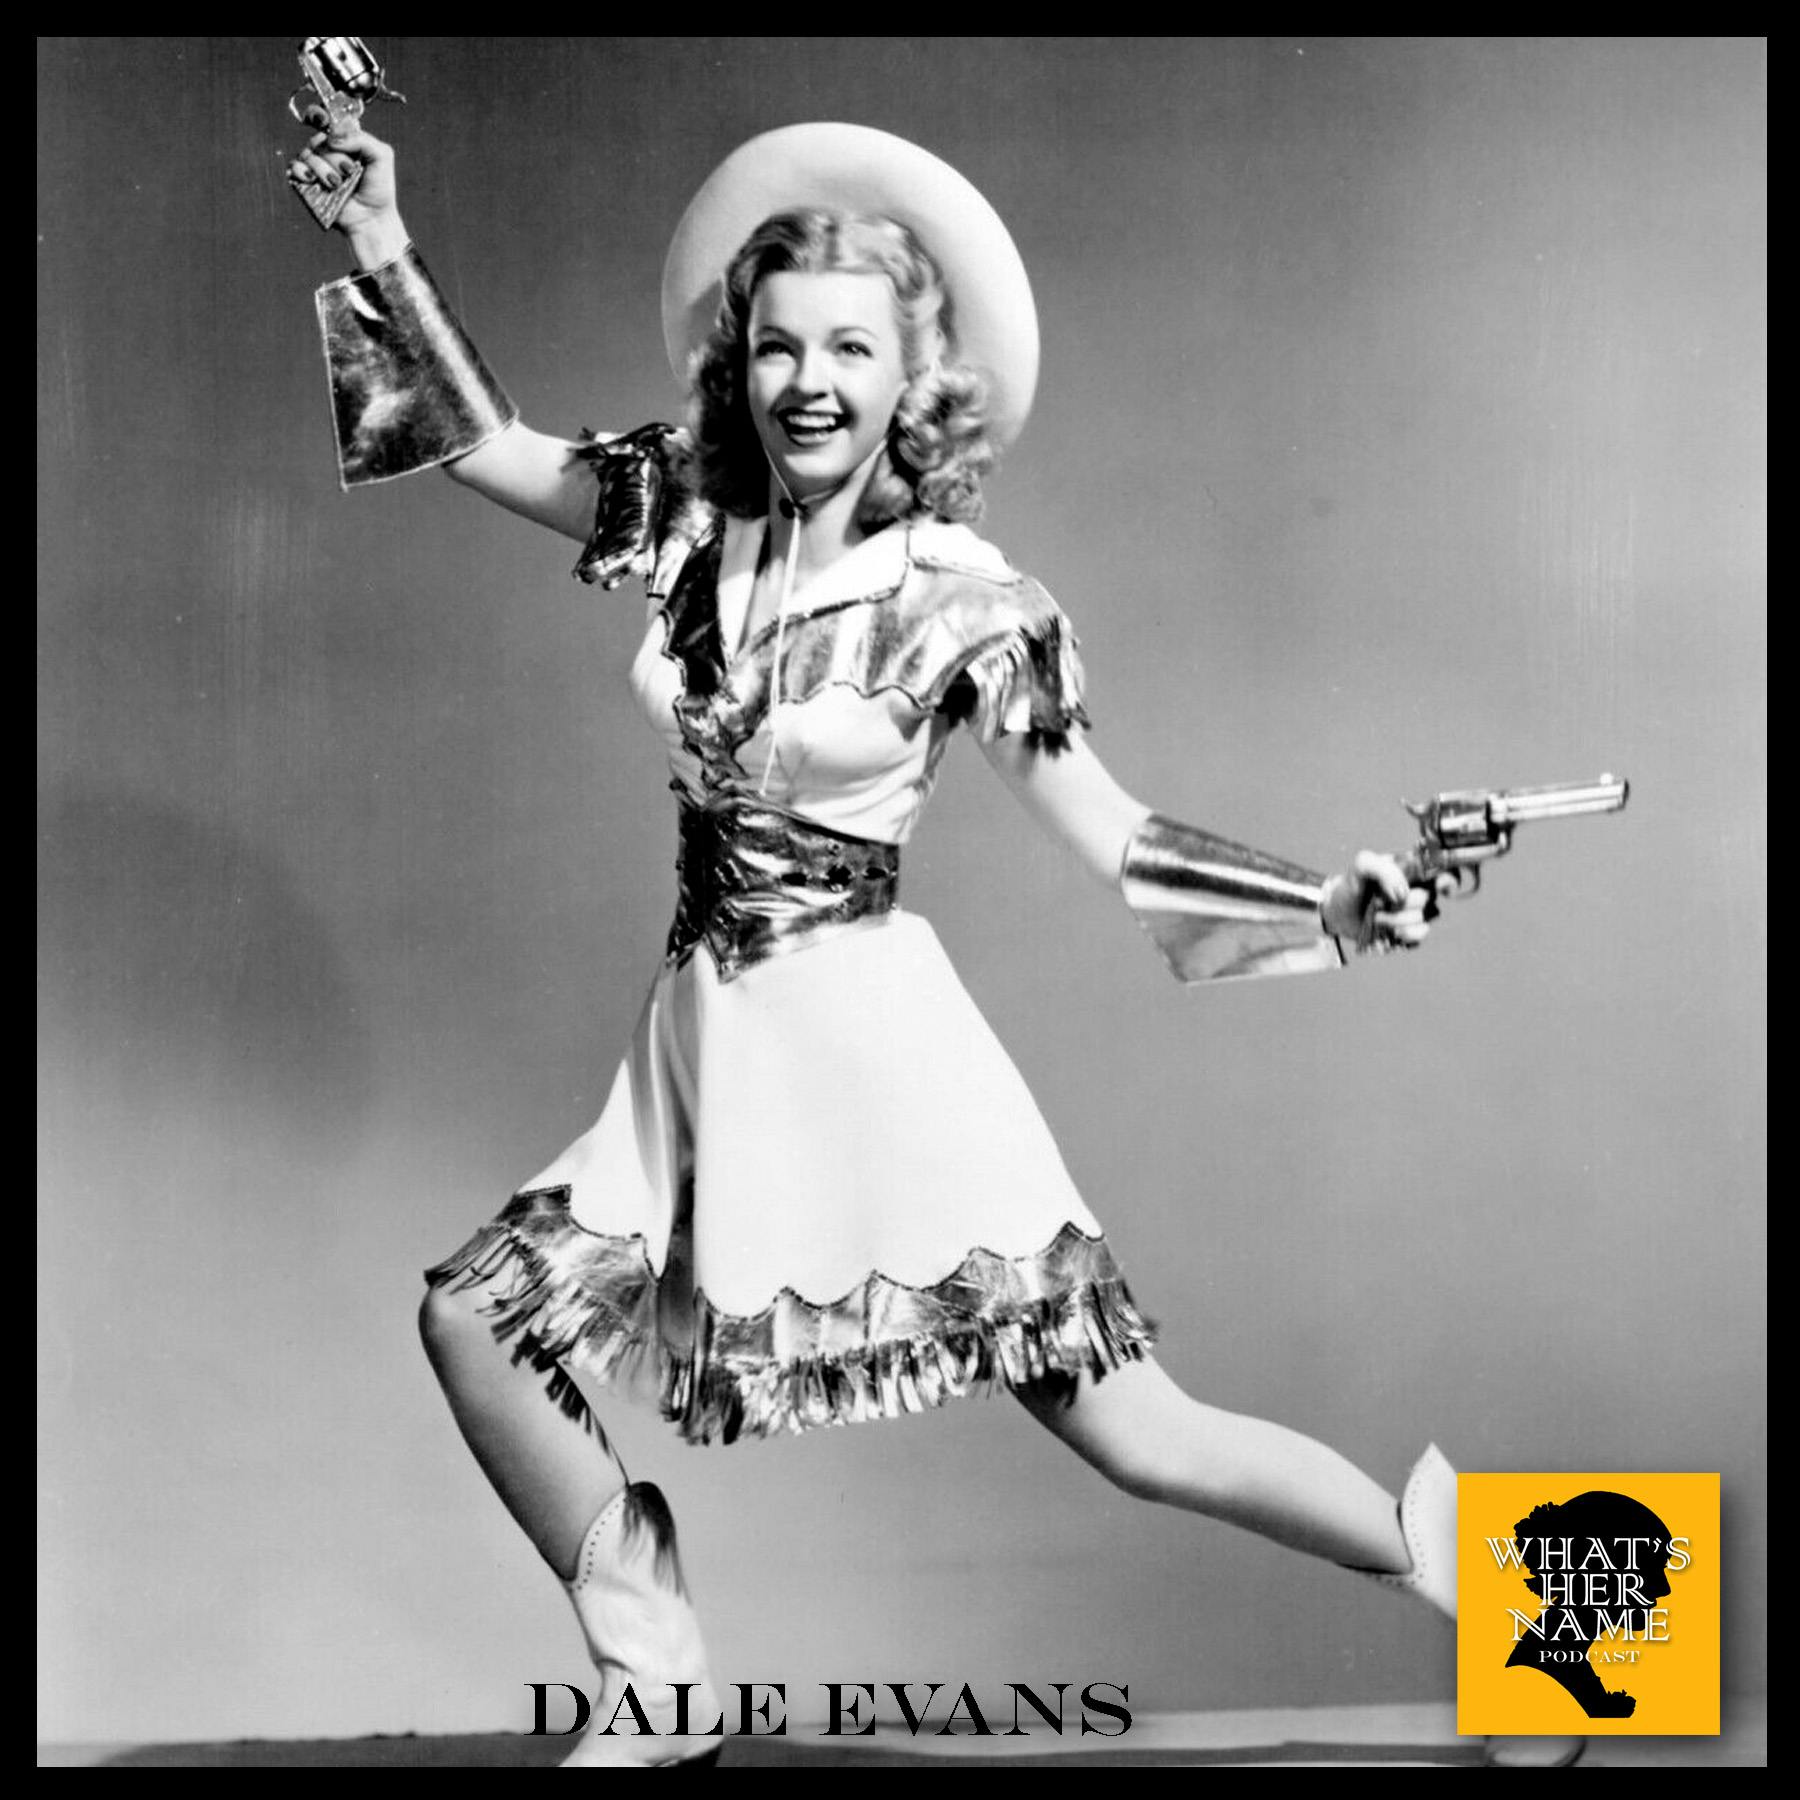 THE QUEEN OF THE WEST Dale Evans